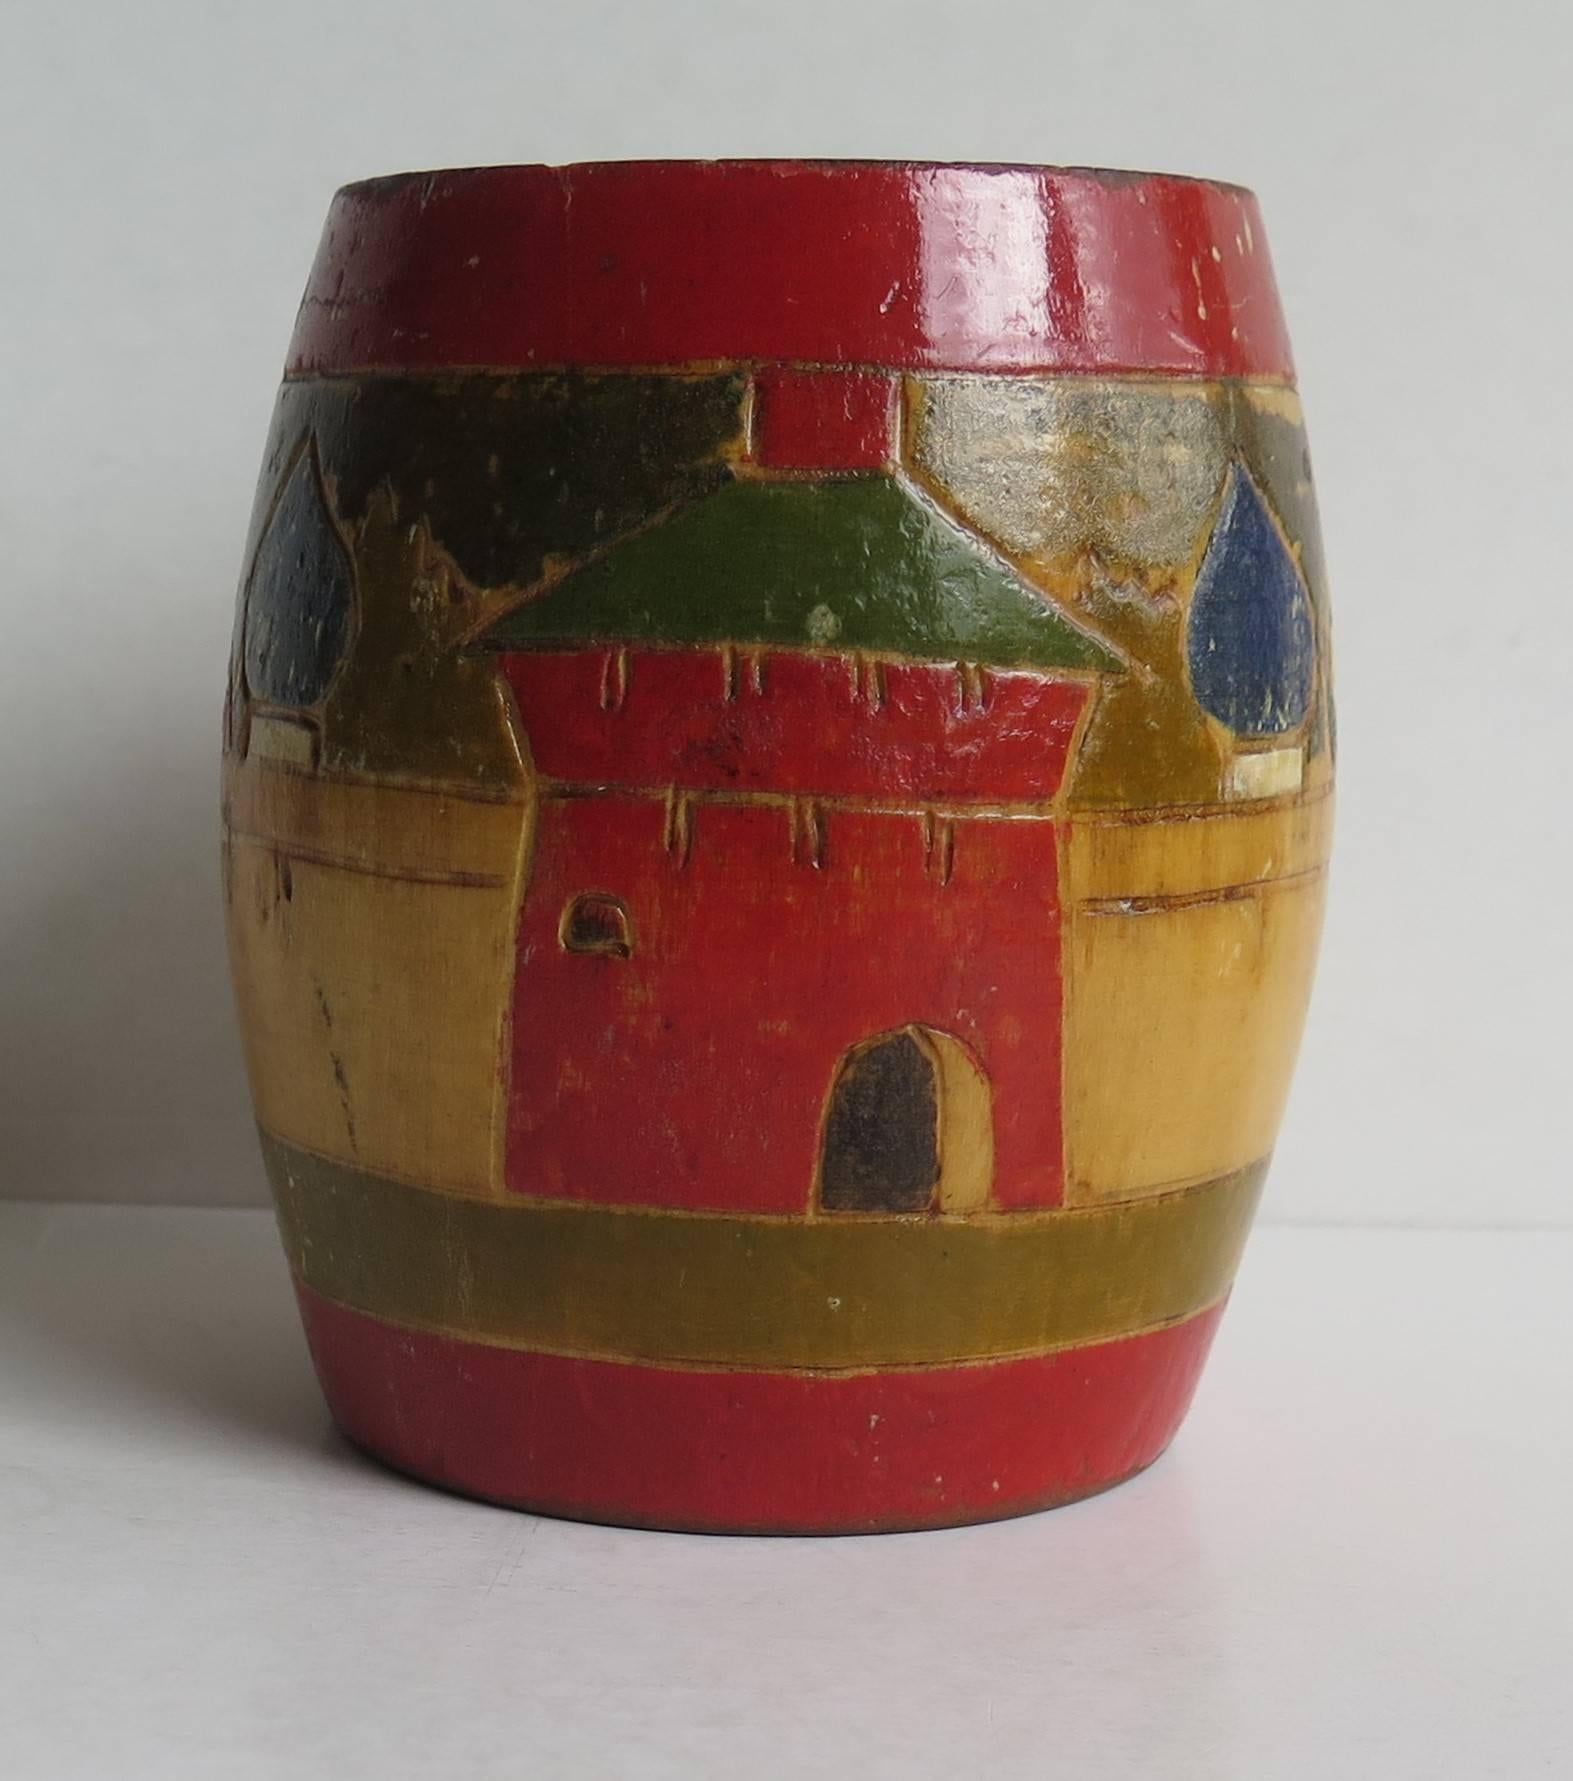 This is a good hand made and painted Folk Art small spill vase or container of central European origin, dating to the mid 19th Century.

The vase is made of wood, hand-turned in the shape of a barrel with hand-carved detail to the outside, depicting